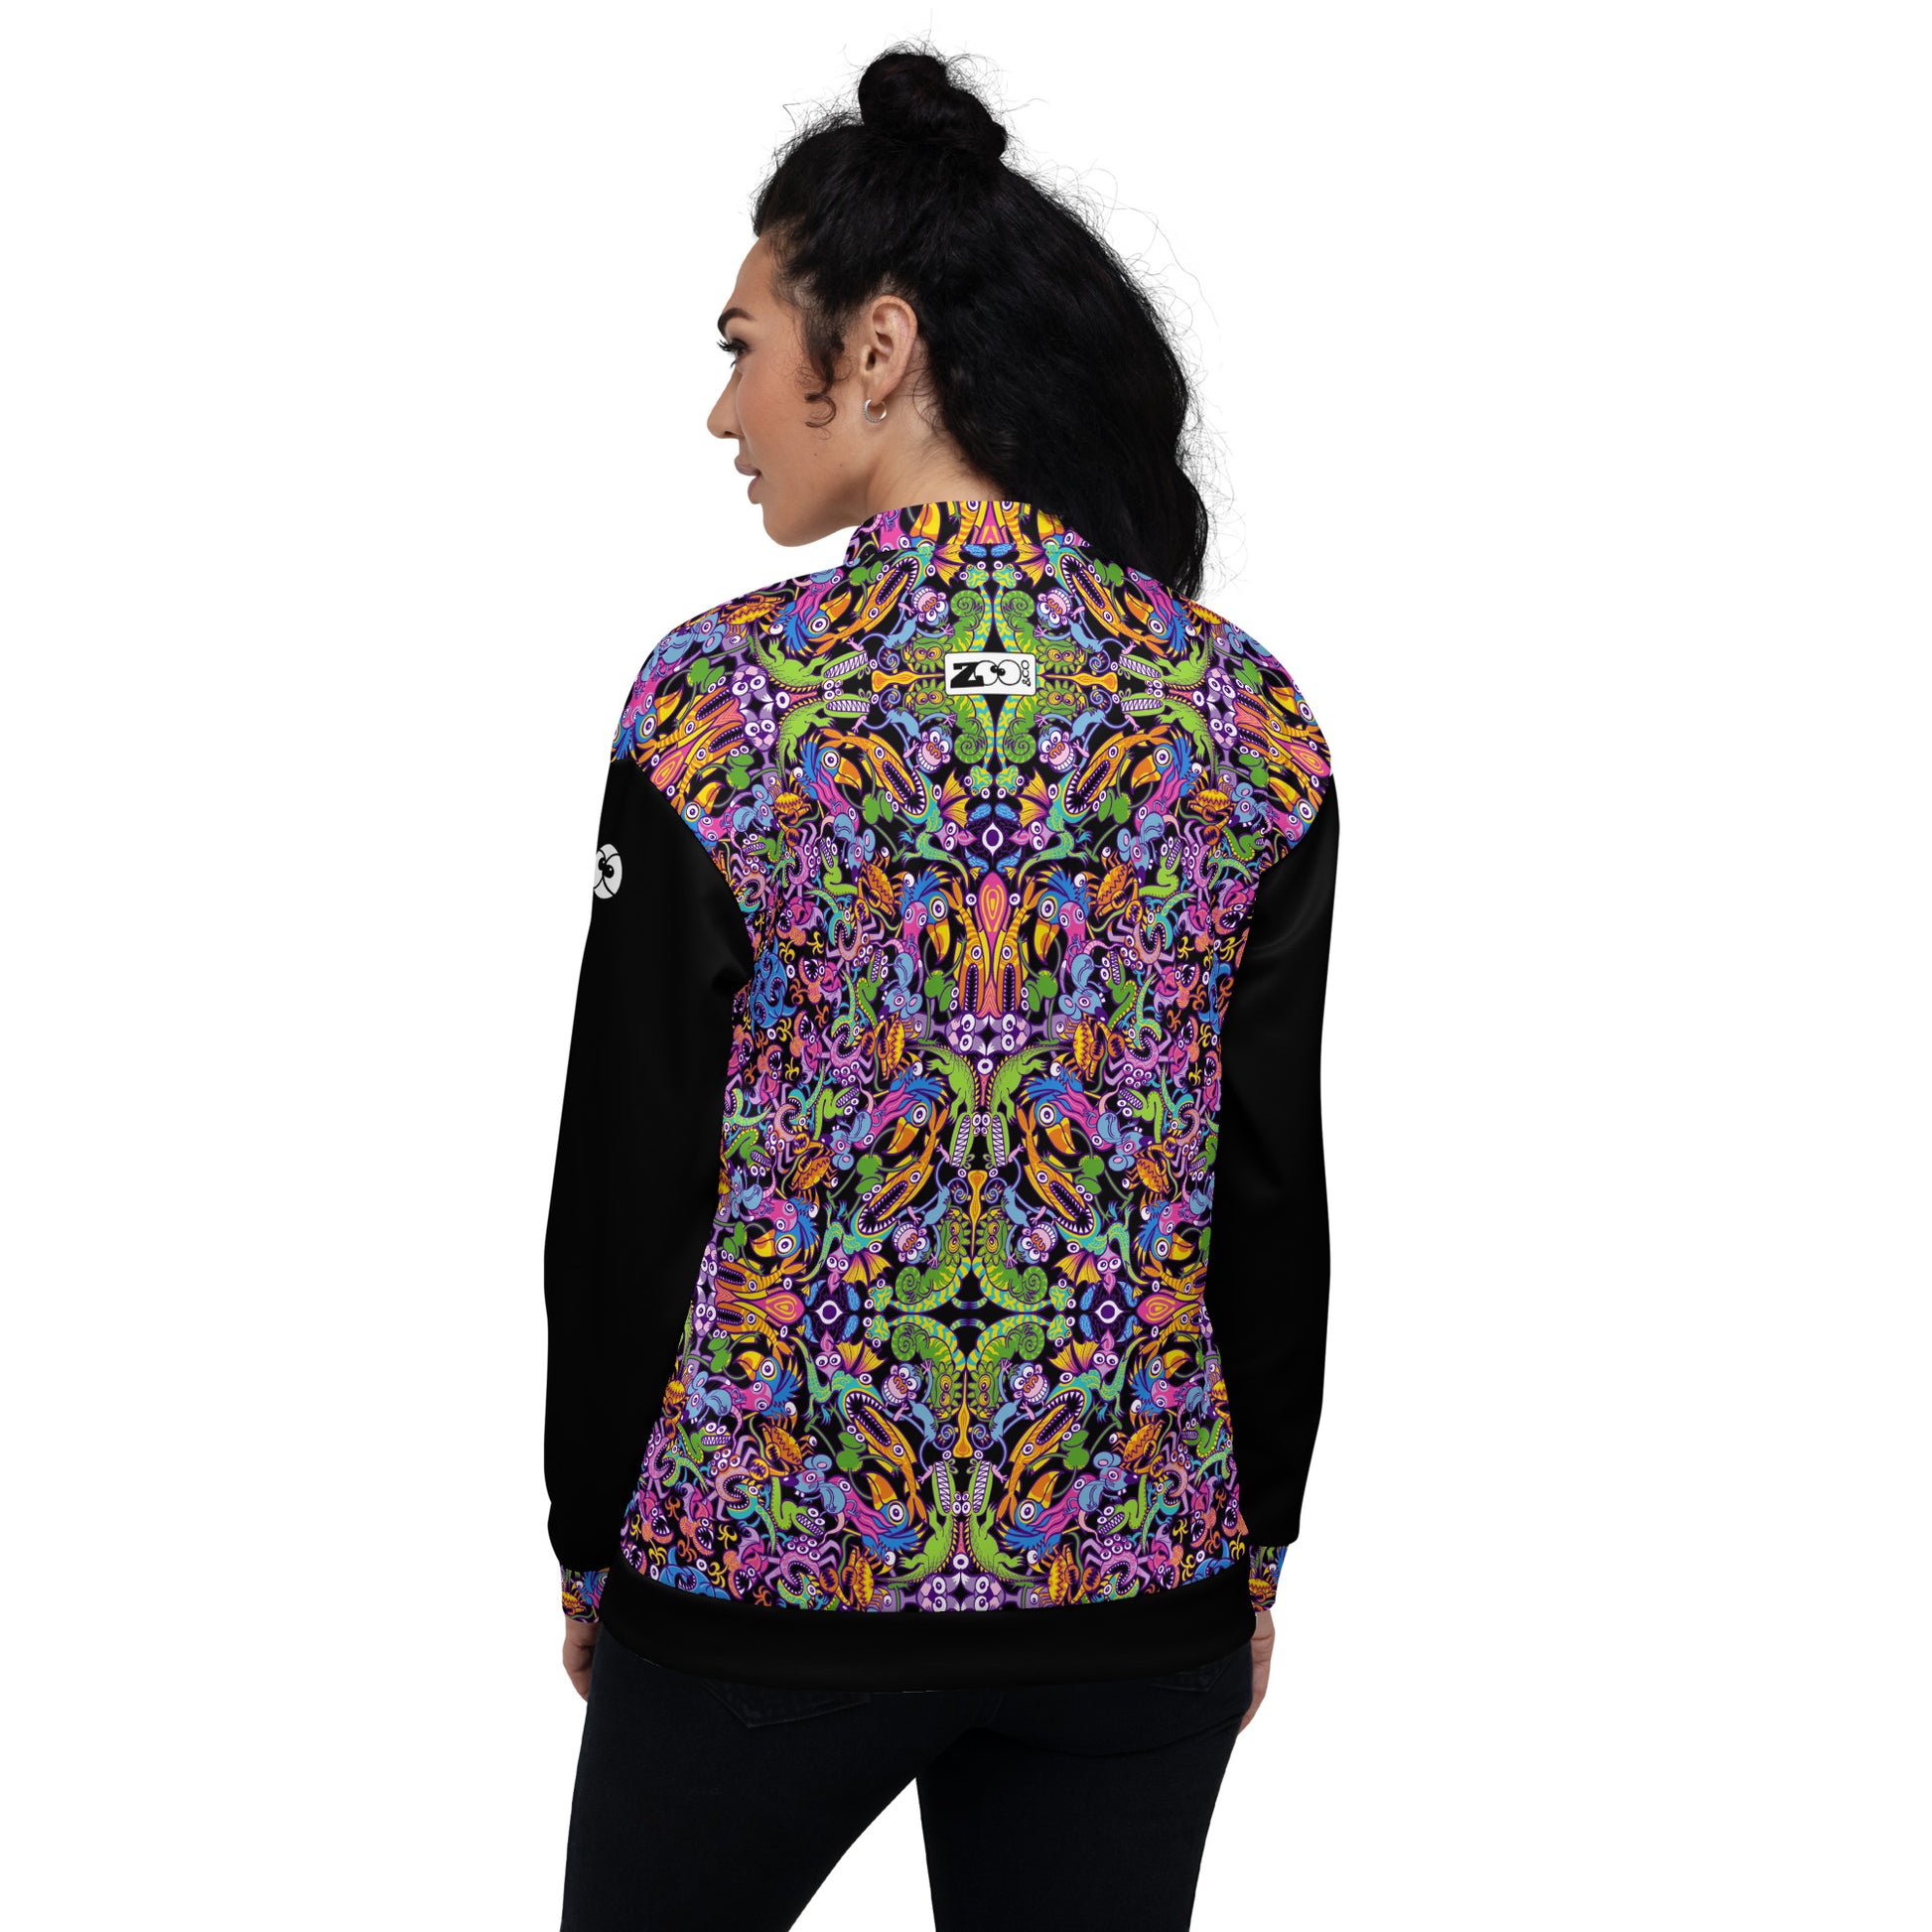 Eccentric critters in a lively festival - Unisex Bomber Jacket. Back view